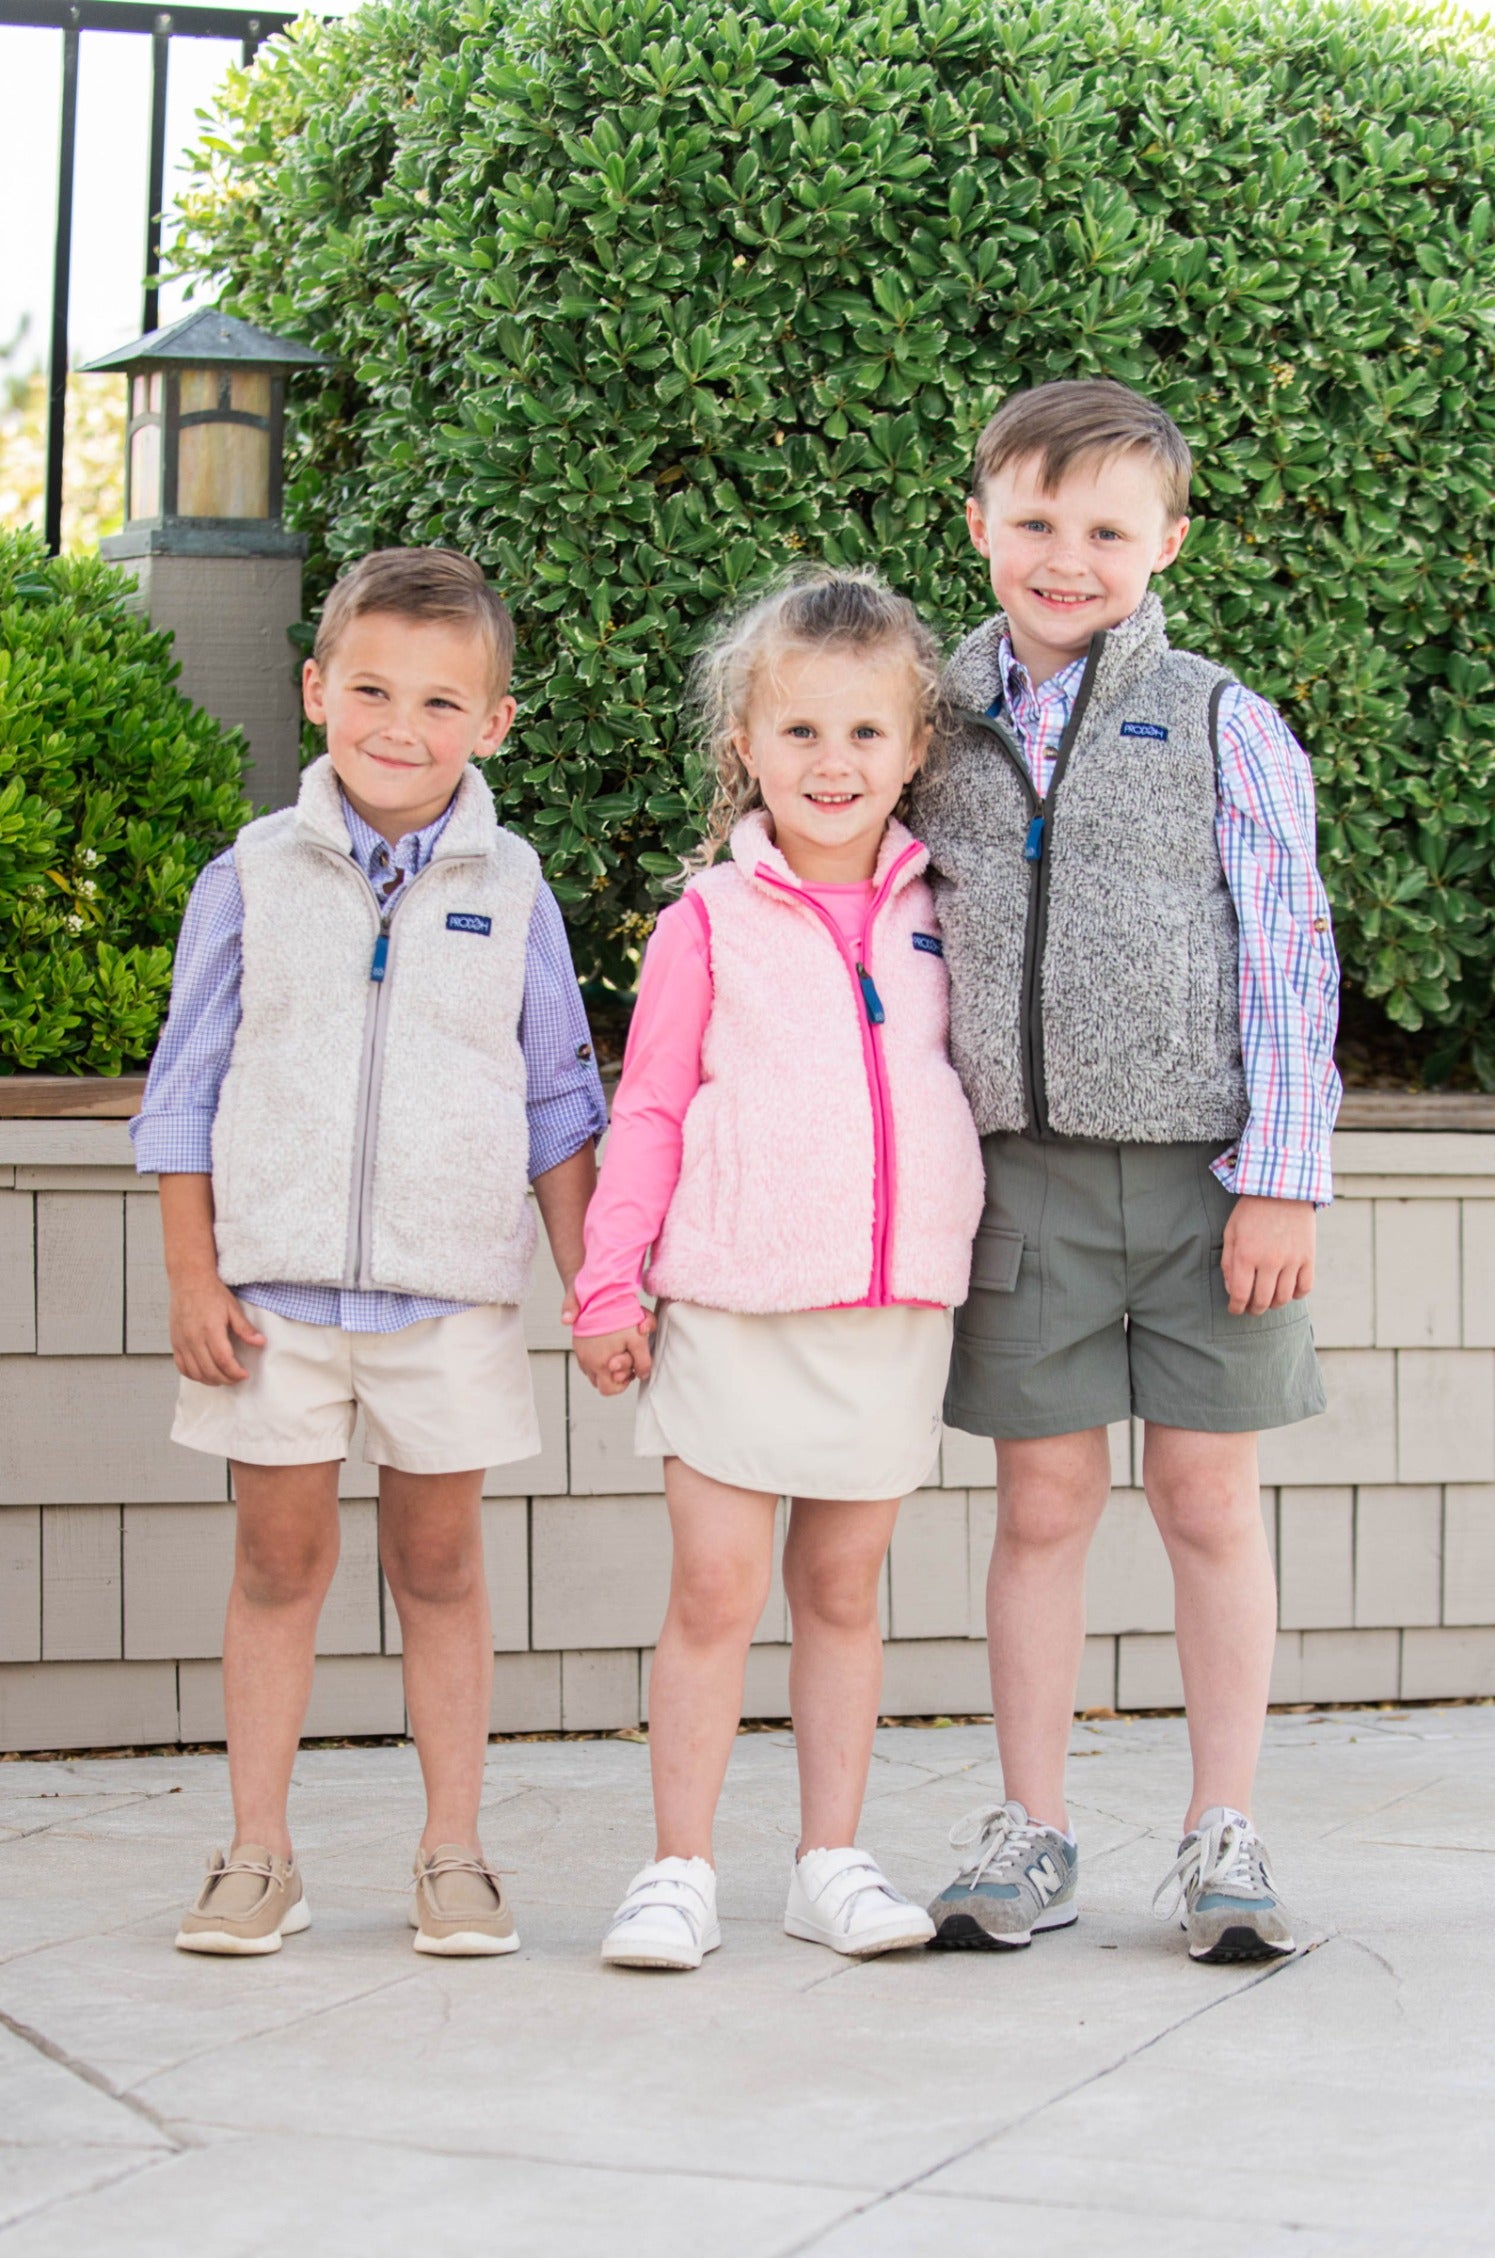 Sherpa Vest - Two Tone Manatee (2T-8/10)